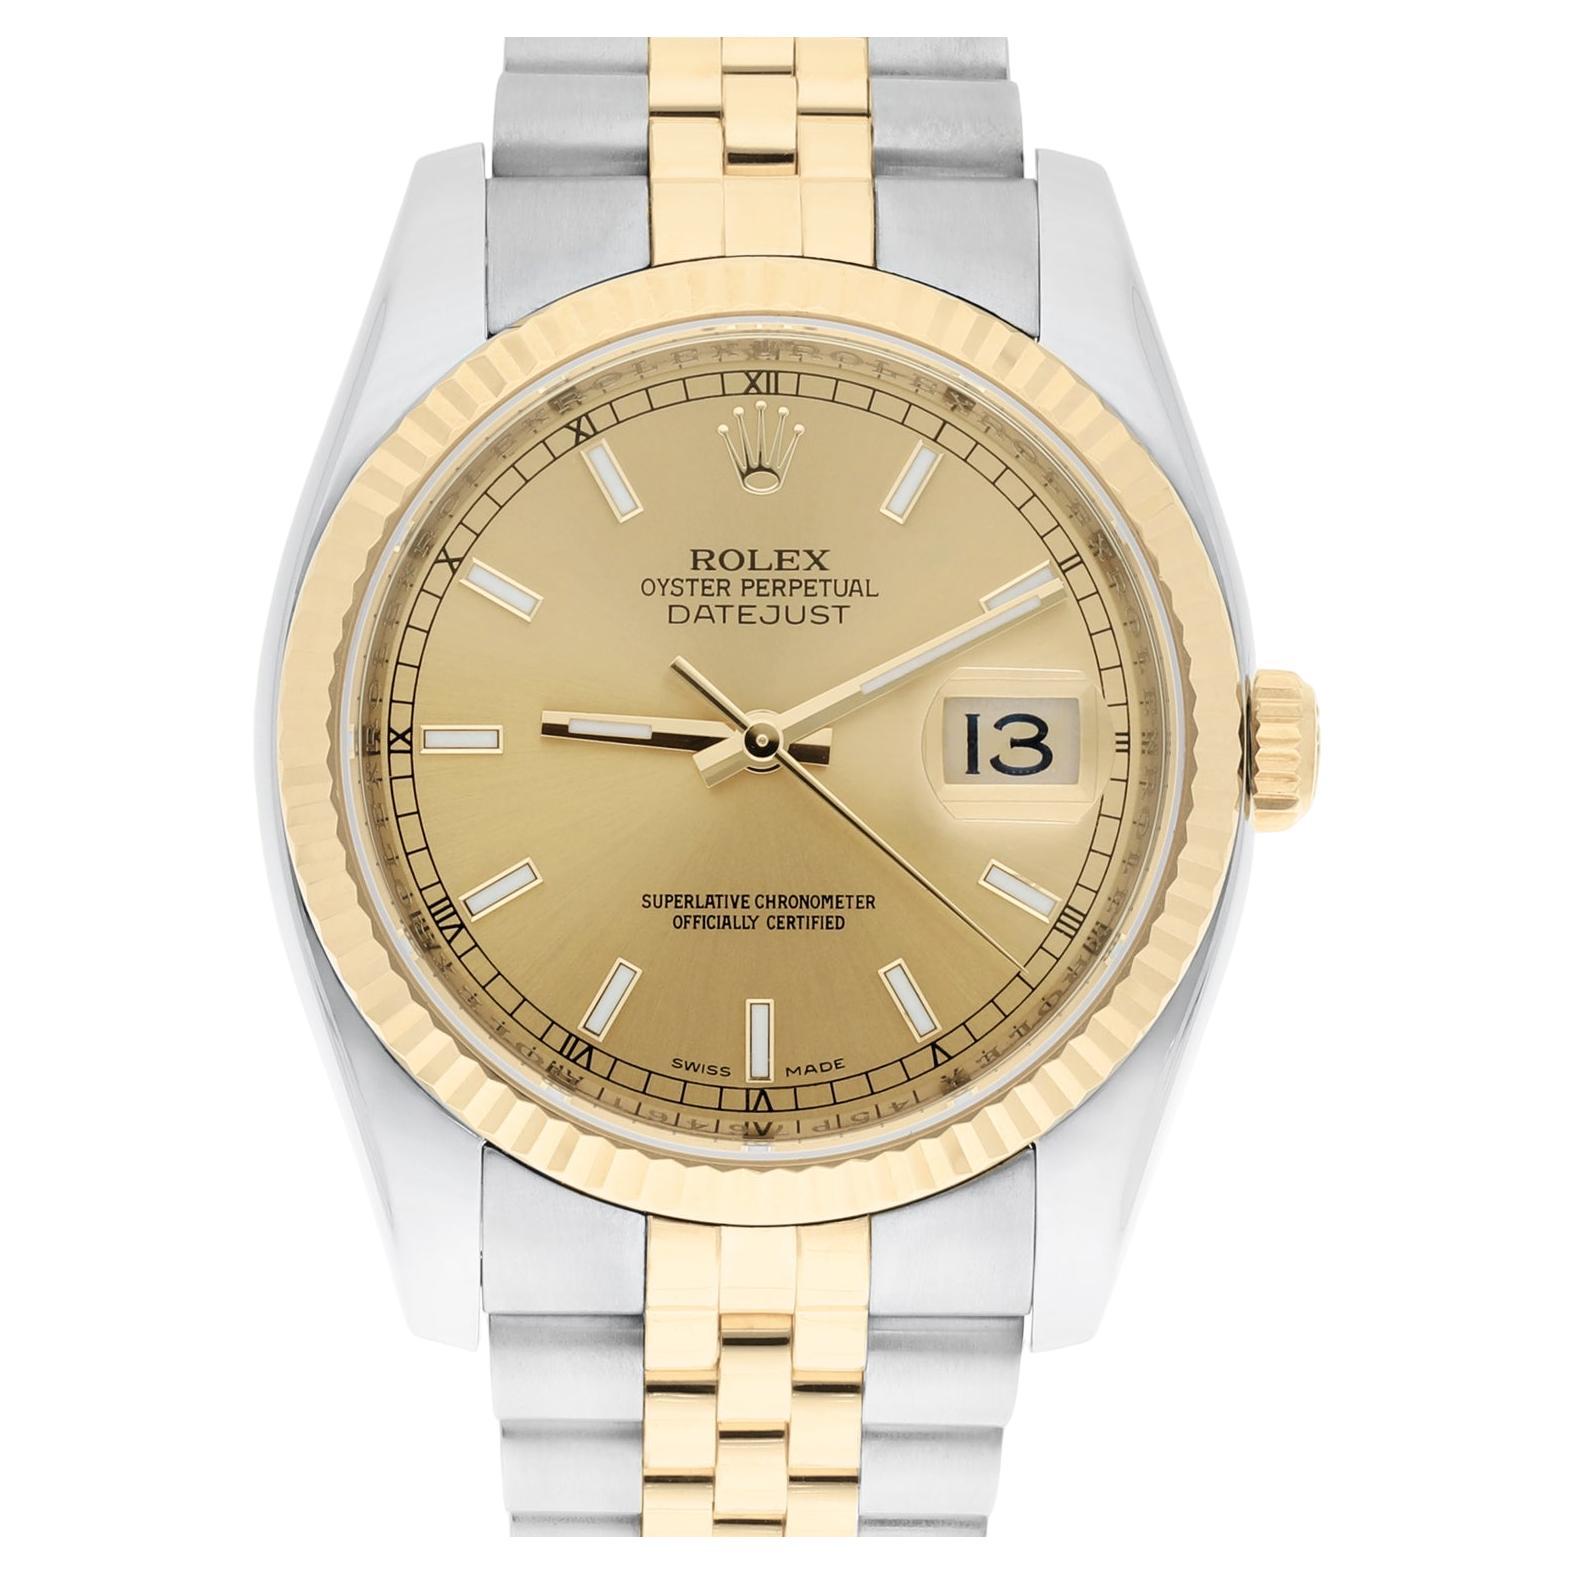 Rolex Datejust 36 Gold and Steel 116233 Watch Champagne Index Dial Jubilee Watch For Sale